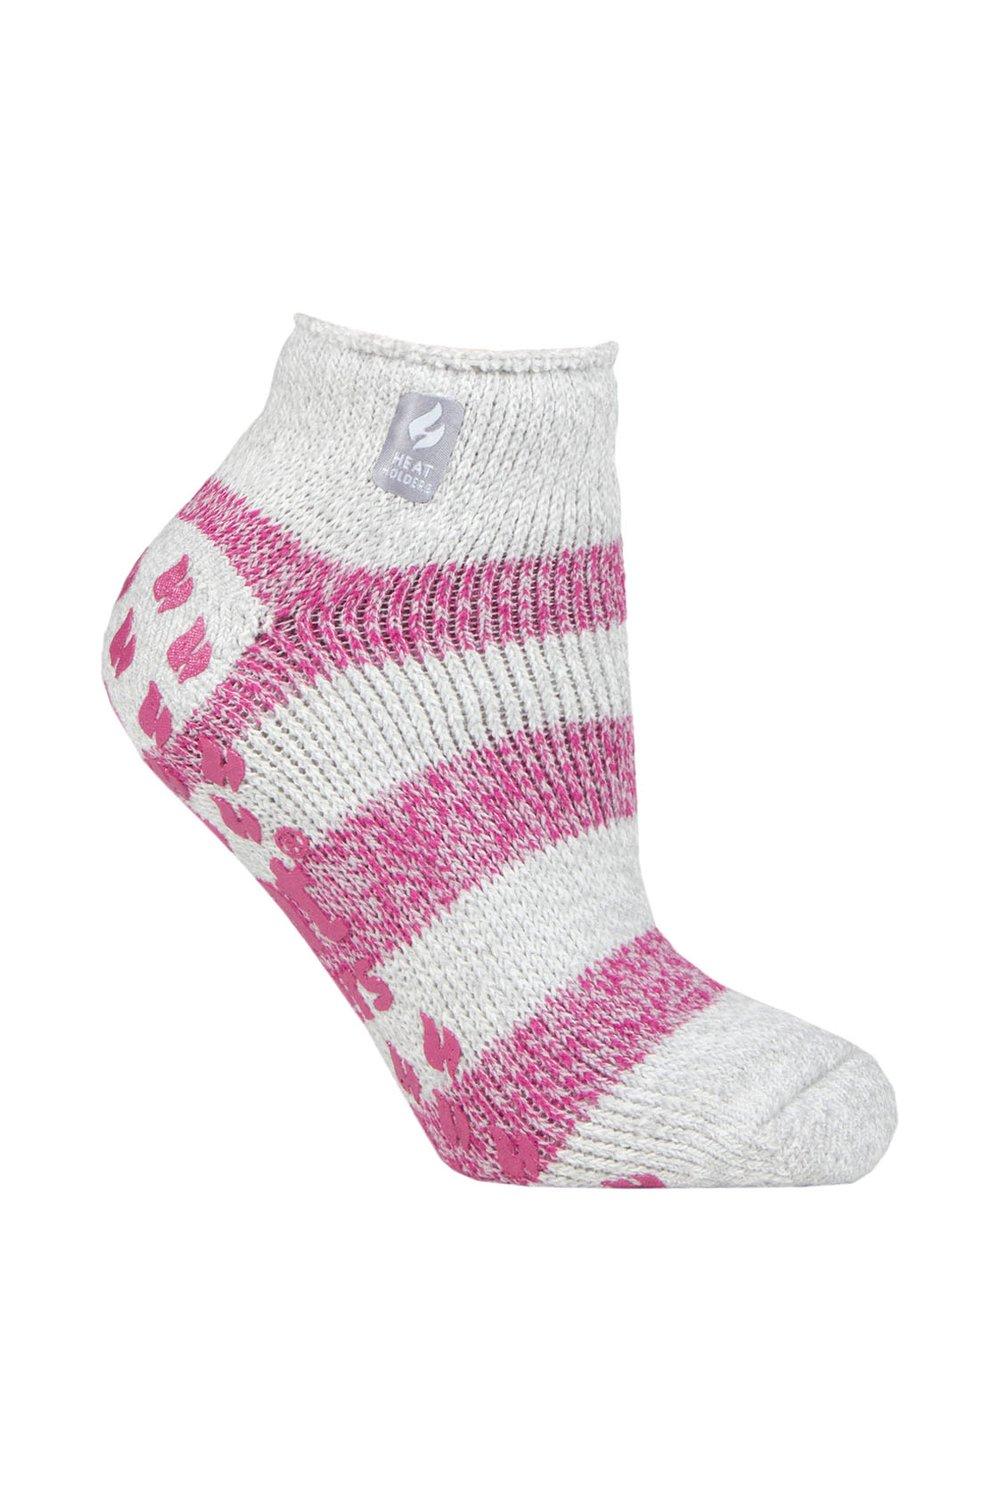 1 Pair 2.3 TOG Patterned and Striped Ankle Slipper Socks